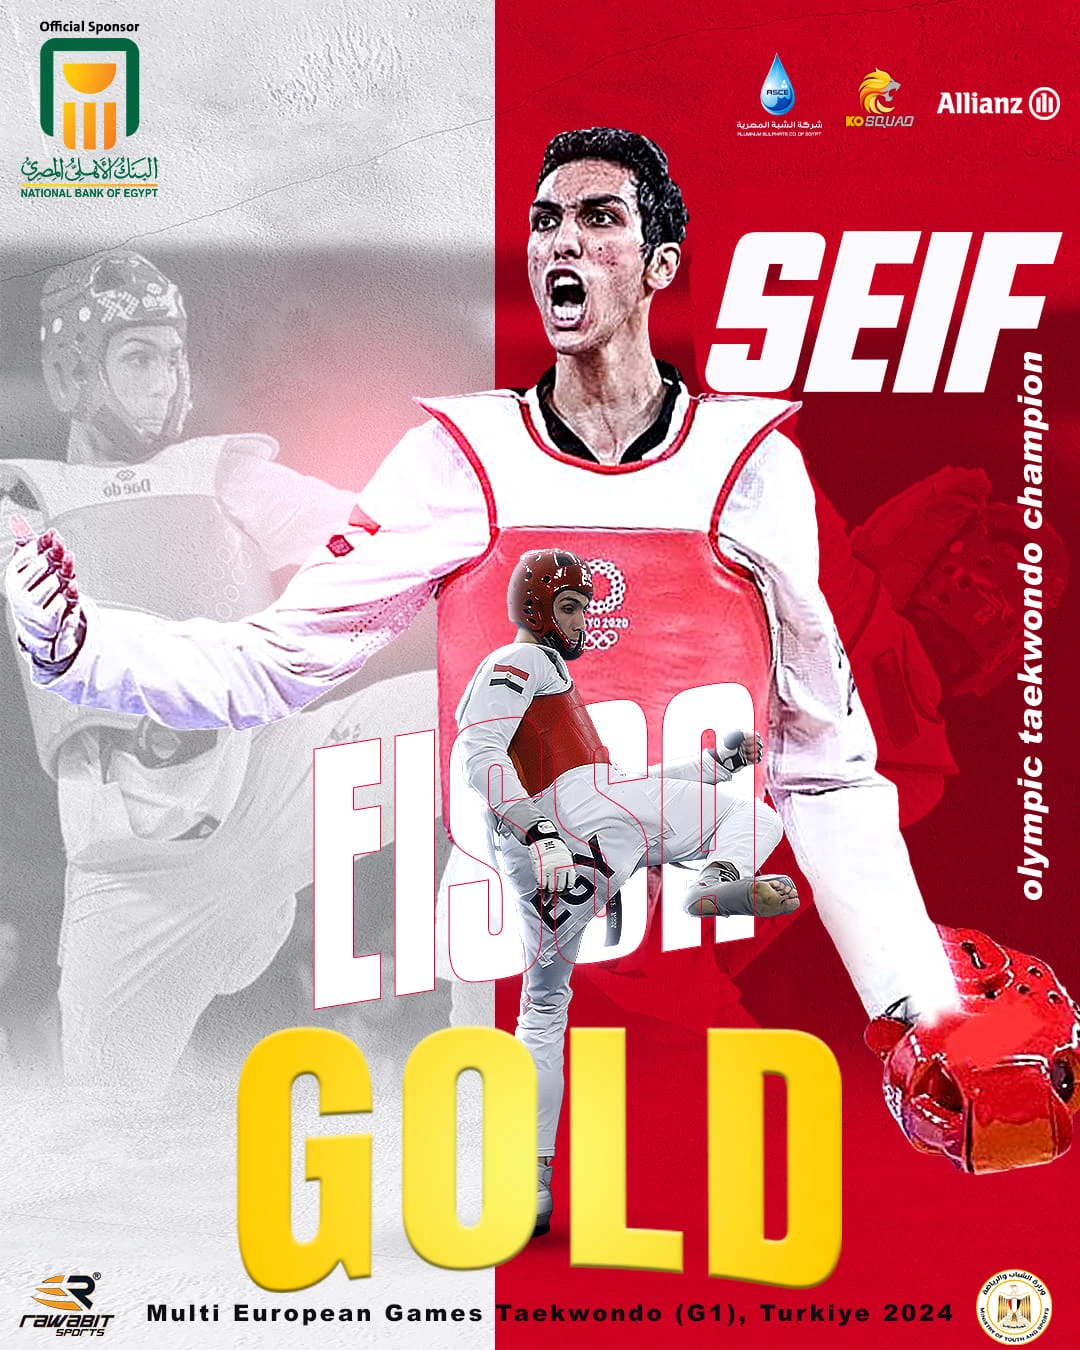 Seif Isa shines and wins gold at the European Open games in Turkey